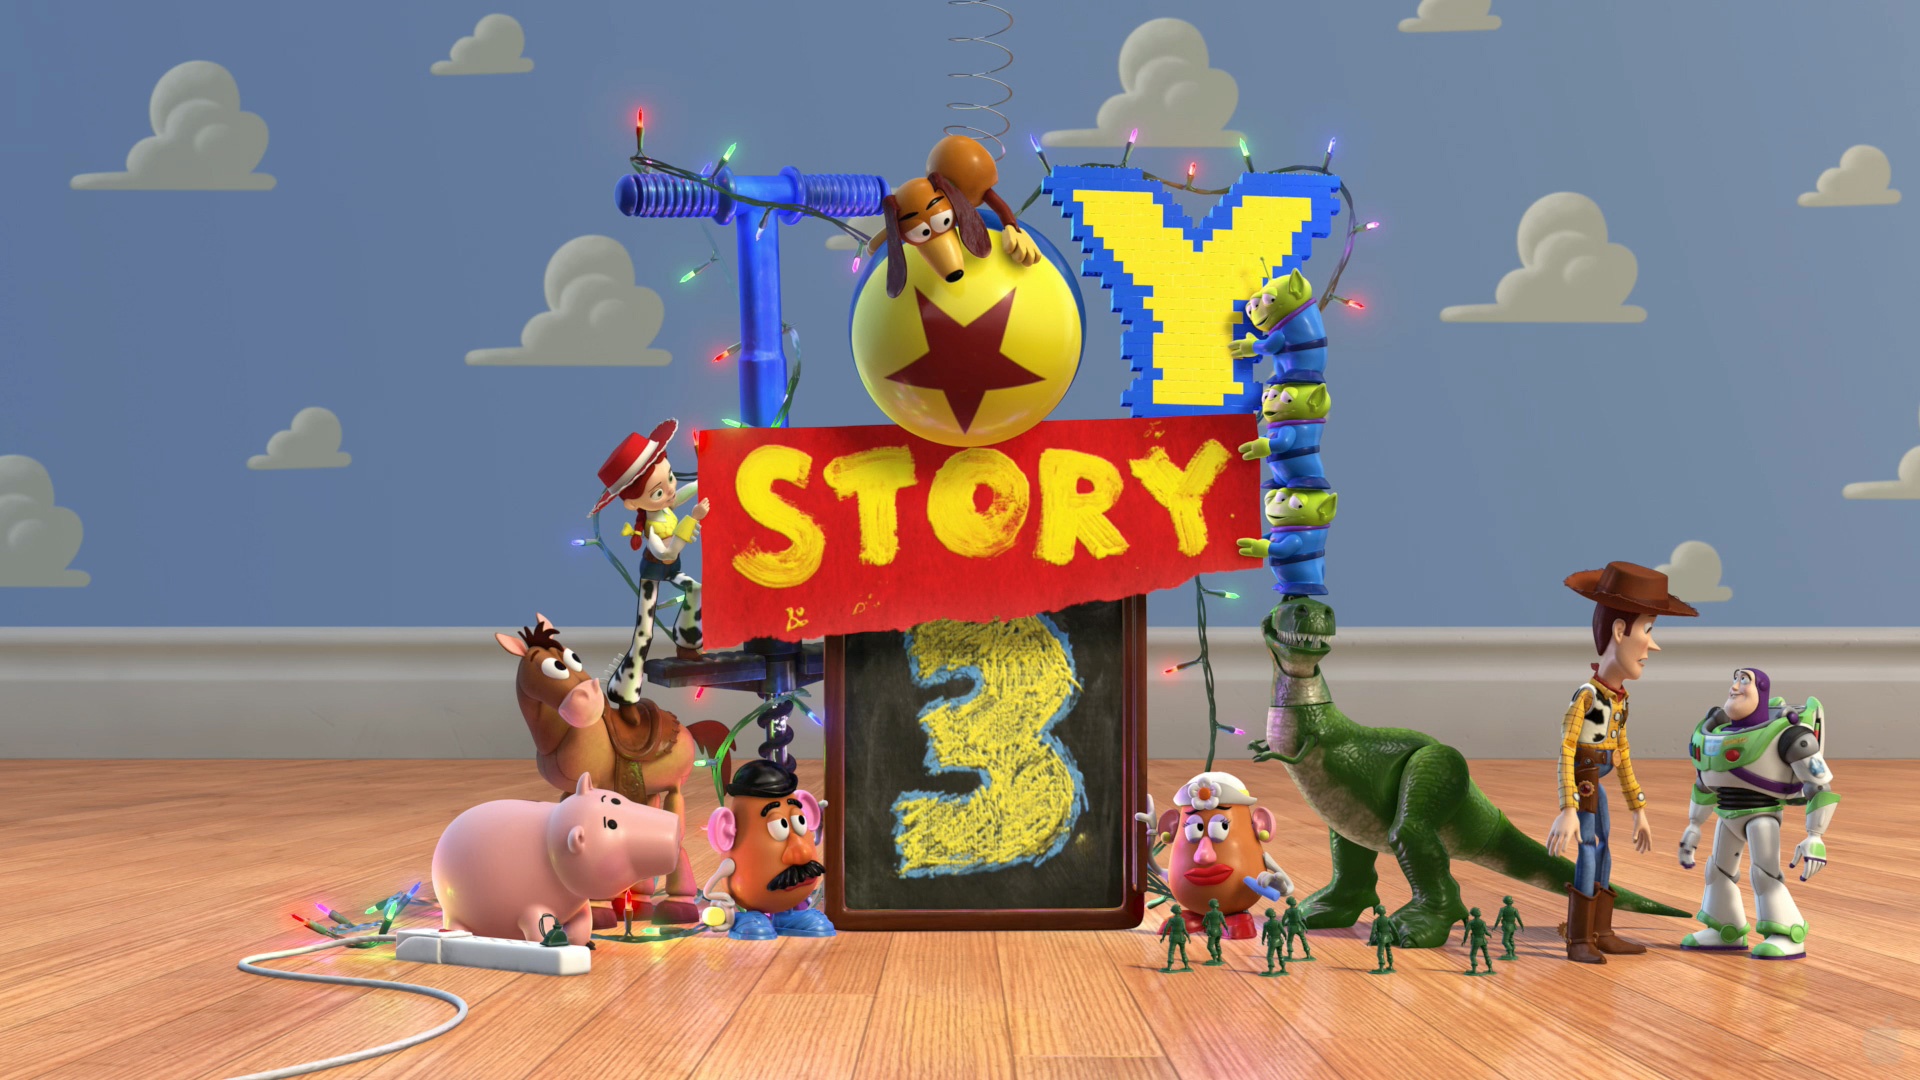 Toy Story 3 Wallpapers Toy Story 3 Myspace Backgrounds Toy Story 3